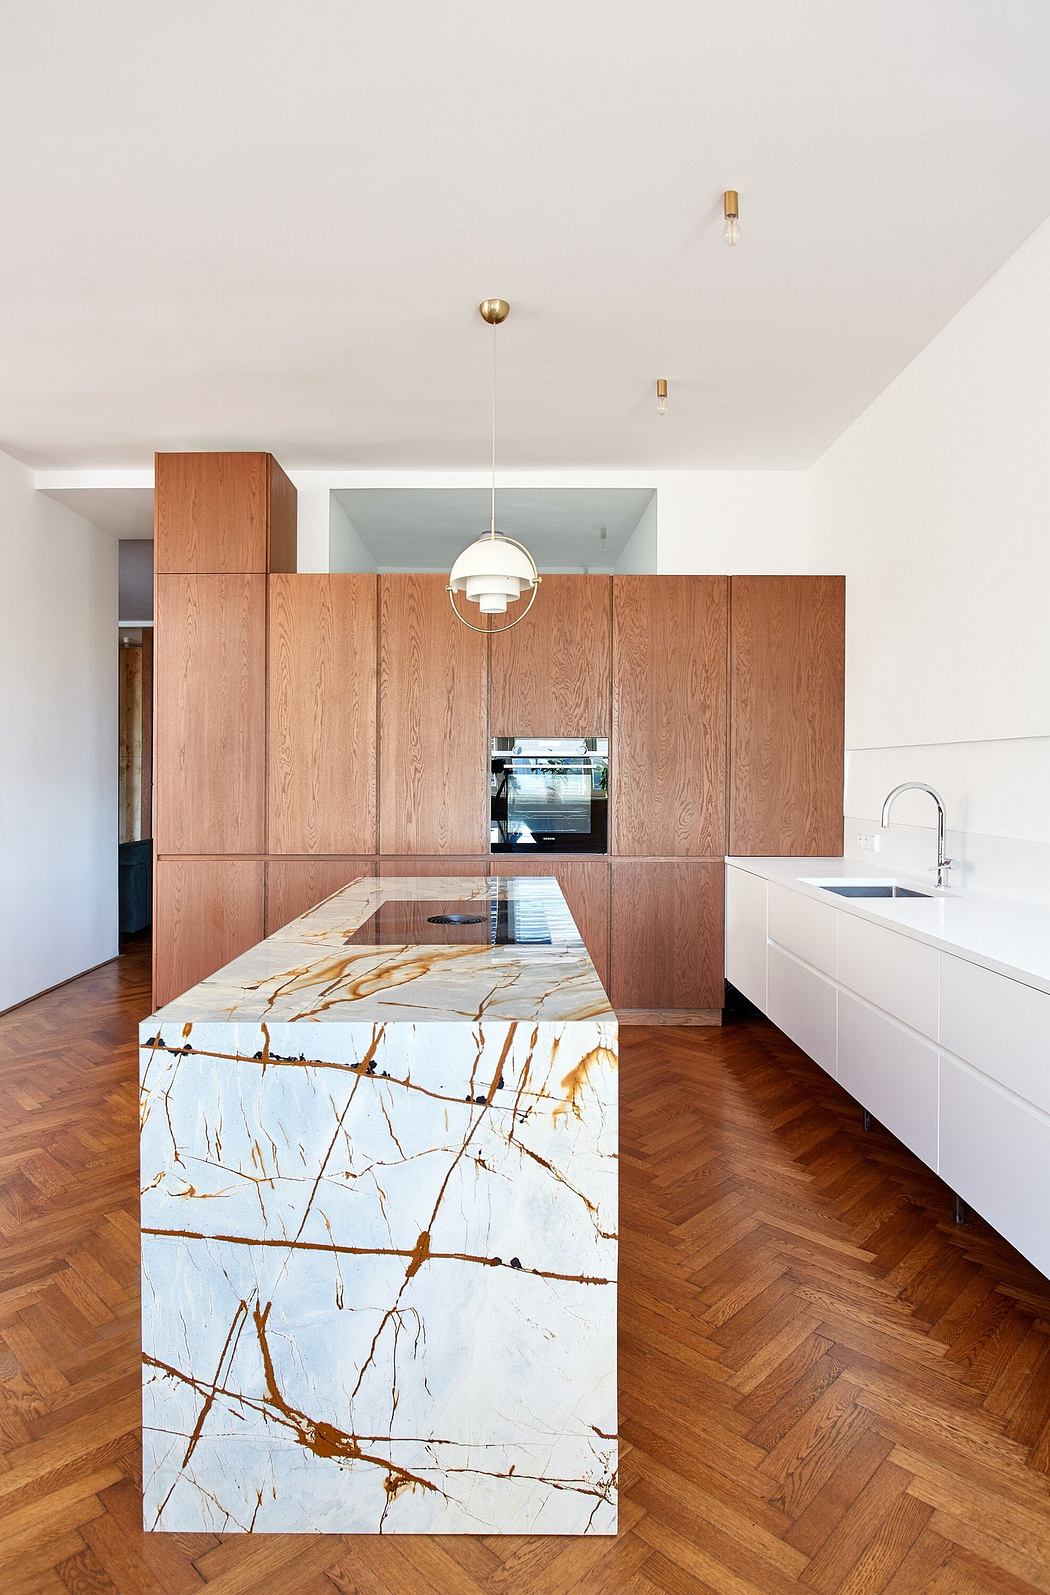 Modern kitchen with wooden cabinets and marble island on herringbone floor.